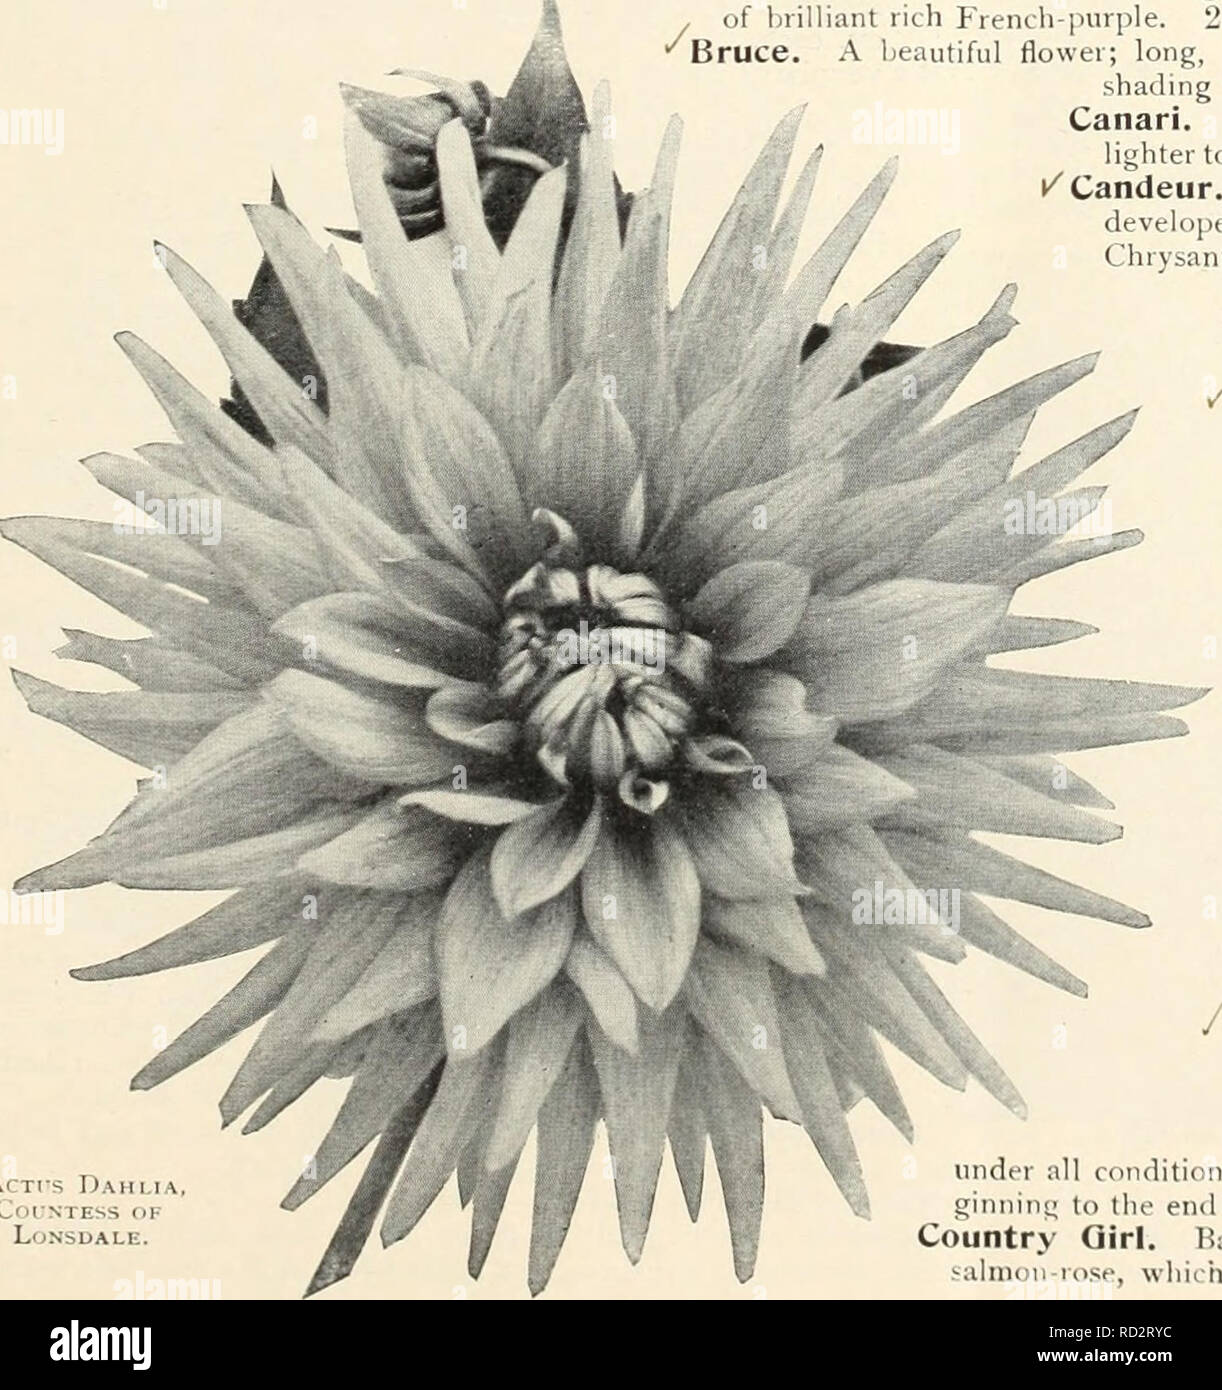 . Dahlias. Flowers Seeds Catalogs; Nurseries (Horticulture) Catalogs; Dahlias Seeds Catalogs. le centre; /. Bessie Palliser a golden sheen twisted and curled.. Cactts Dahlia col-ntess of Lonsdale. Cactus Dahlia. CaNDIiLiH. Roman-ochre suftused with salmon, with at the base of the long petals, which are 15 cts. each. Bismarck. One of the best intense fiery-reds; gracefully formed flower, with incurved petals on stiff stems held well above the foliage. 35 cts. each, 'Blaustrumpf {Blue Stocking). A very distinct deep pur- ple with bluish suffusion; a good flower. 35 cts. each. &quot;^Blenda. A la Stock Photo